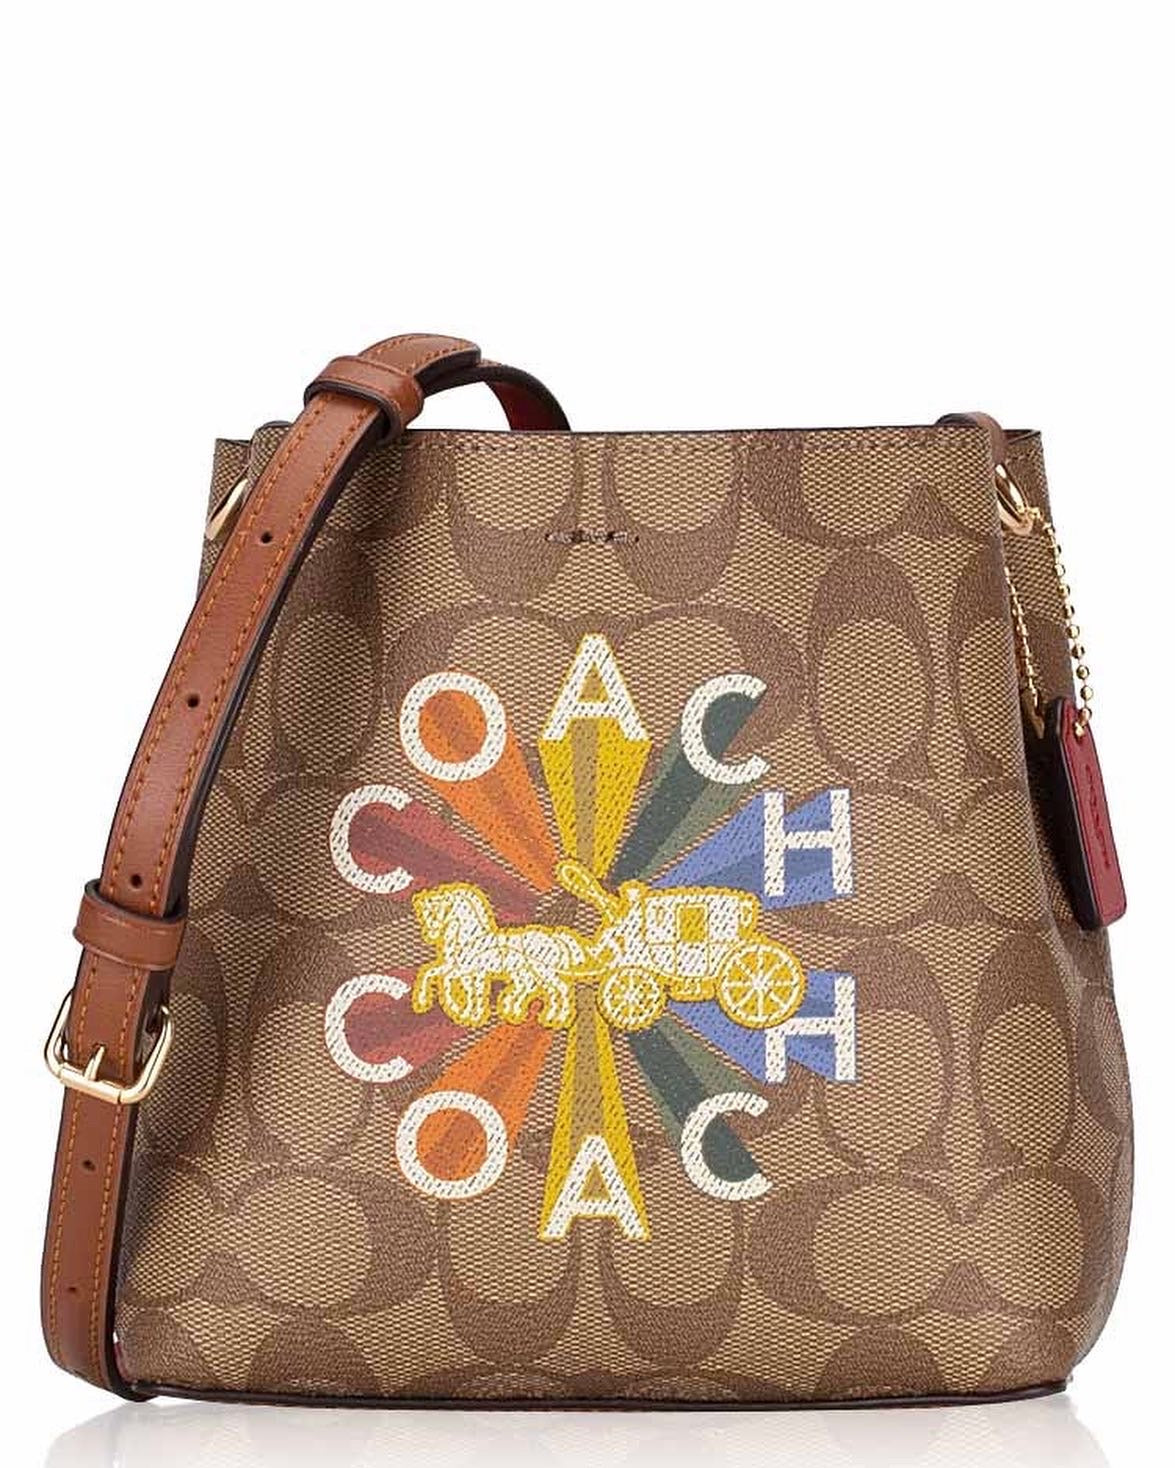 Coach Mini Town Bucket Bag Review, What Can It Fit